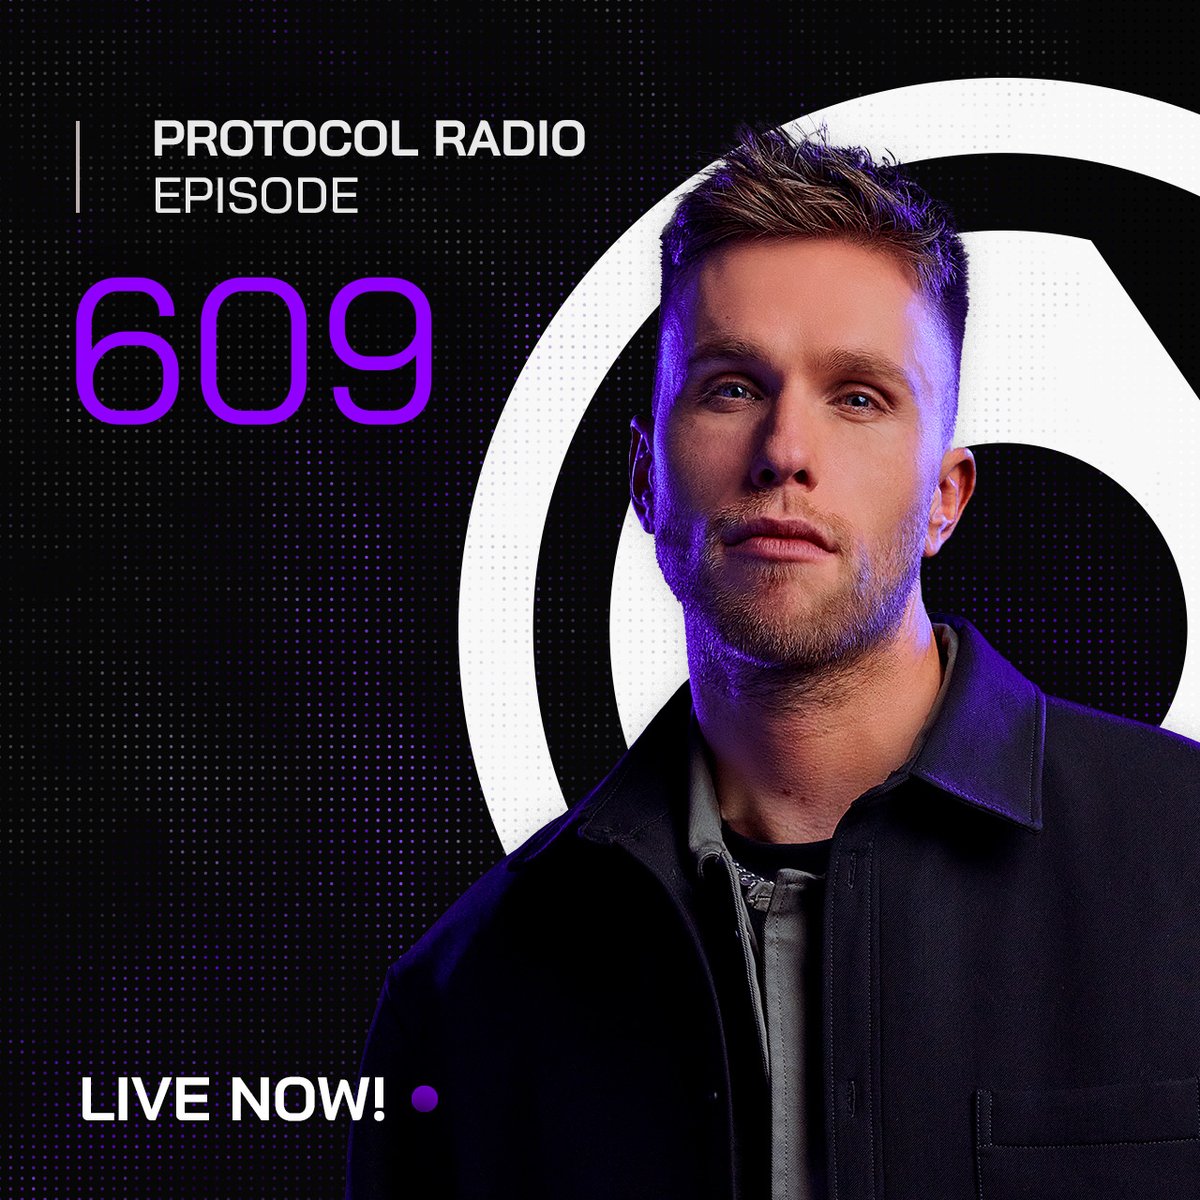 ON-AIR! 🔥 This is #PRR609 by Nicky Romero! This week we've got many new tracks by KRYDER, John Summit, Firebeatz and Mr. Belt & Wezol to name a few! 'Human' by Manuals & WildVibes ft. Cory Ezra is the #ProtocolSpotlight of this week!